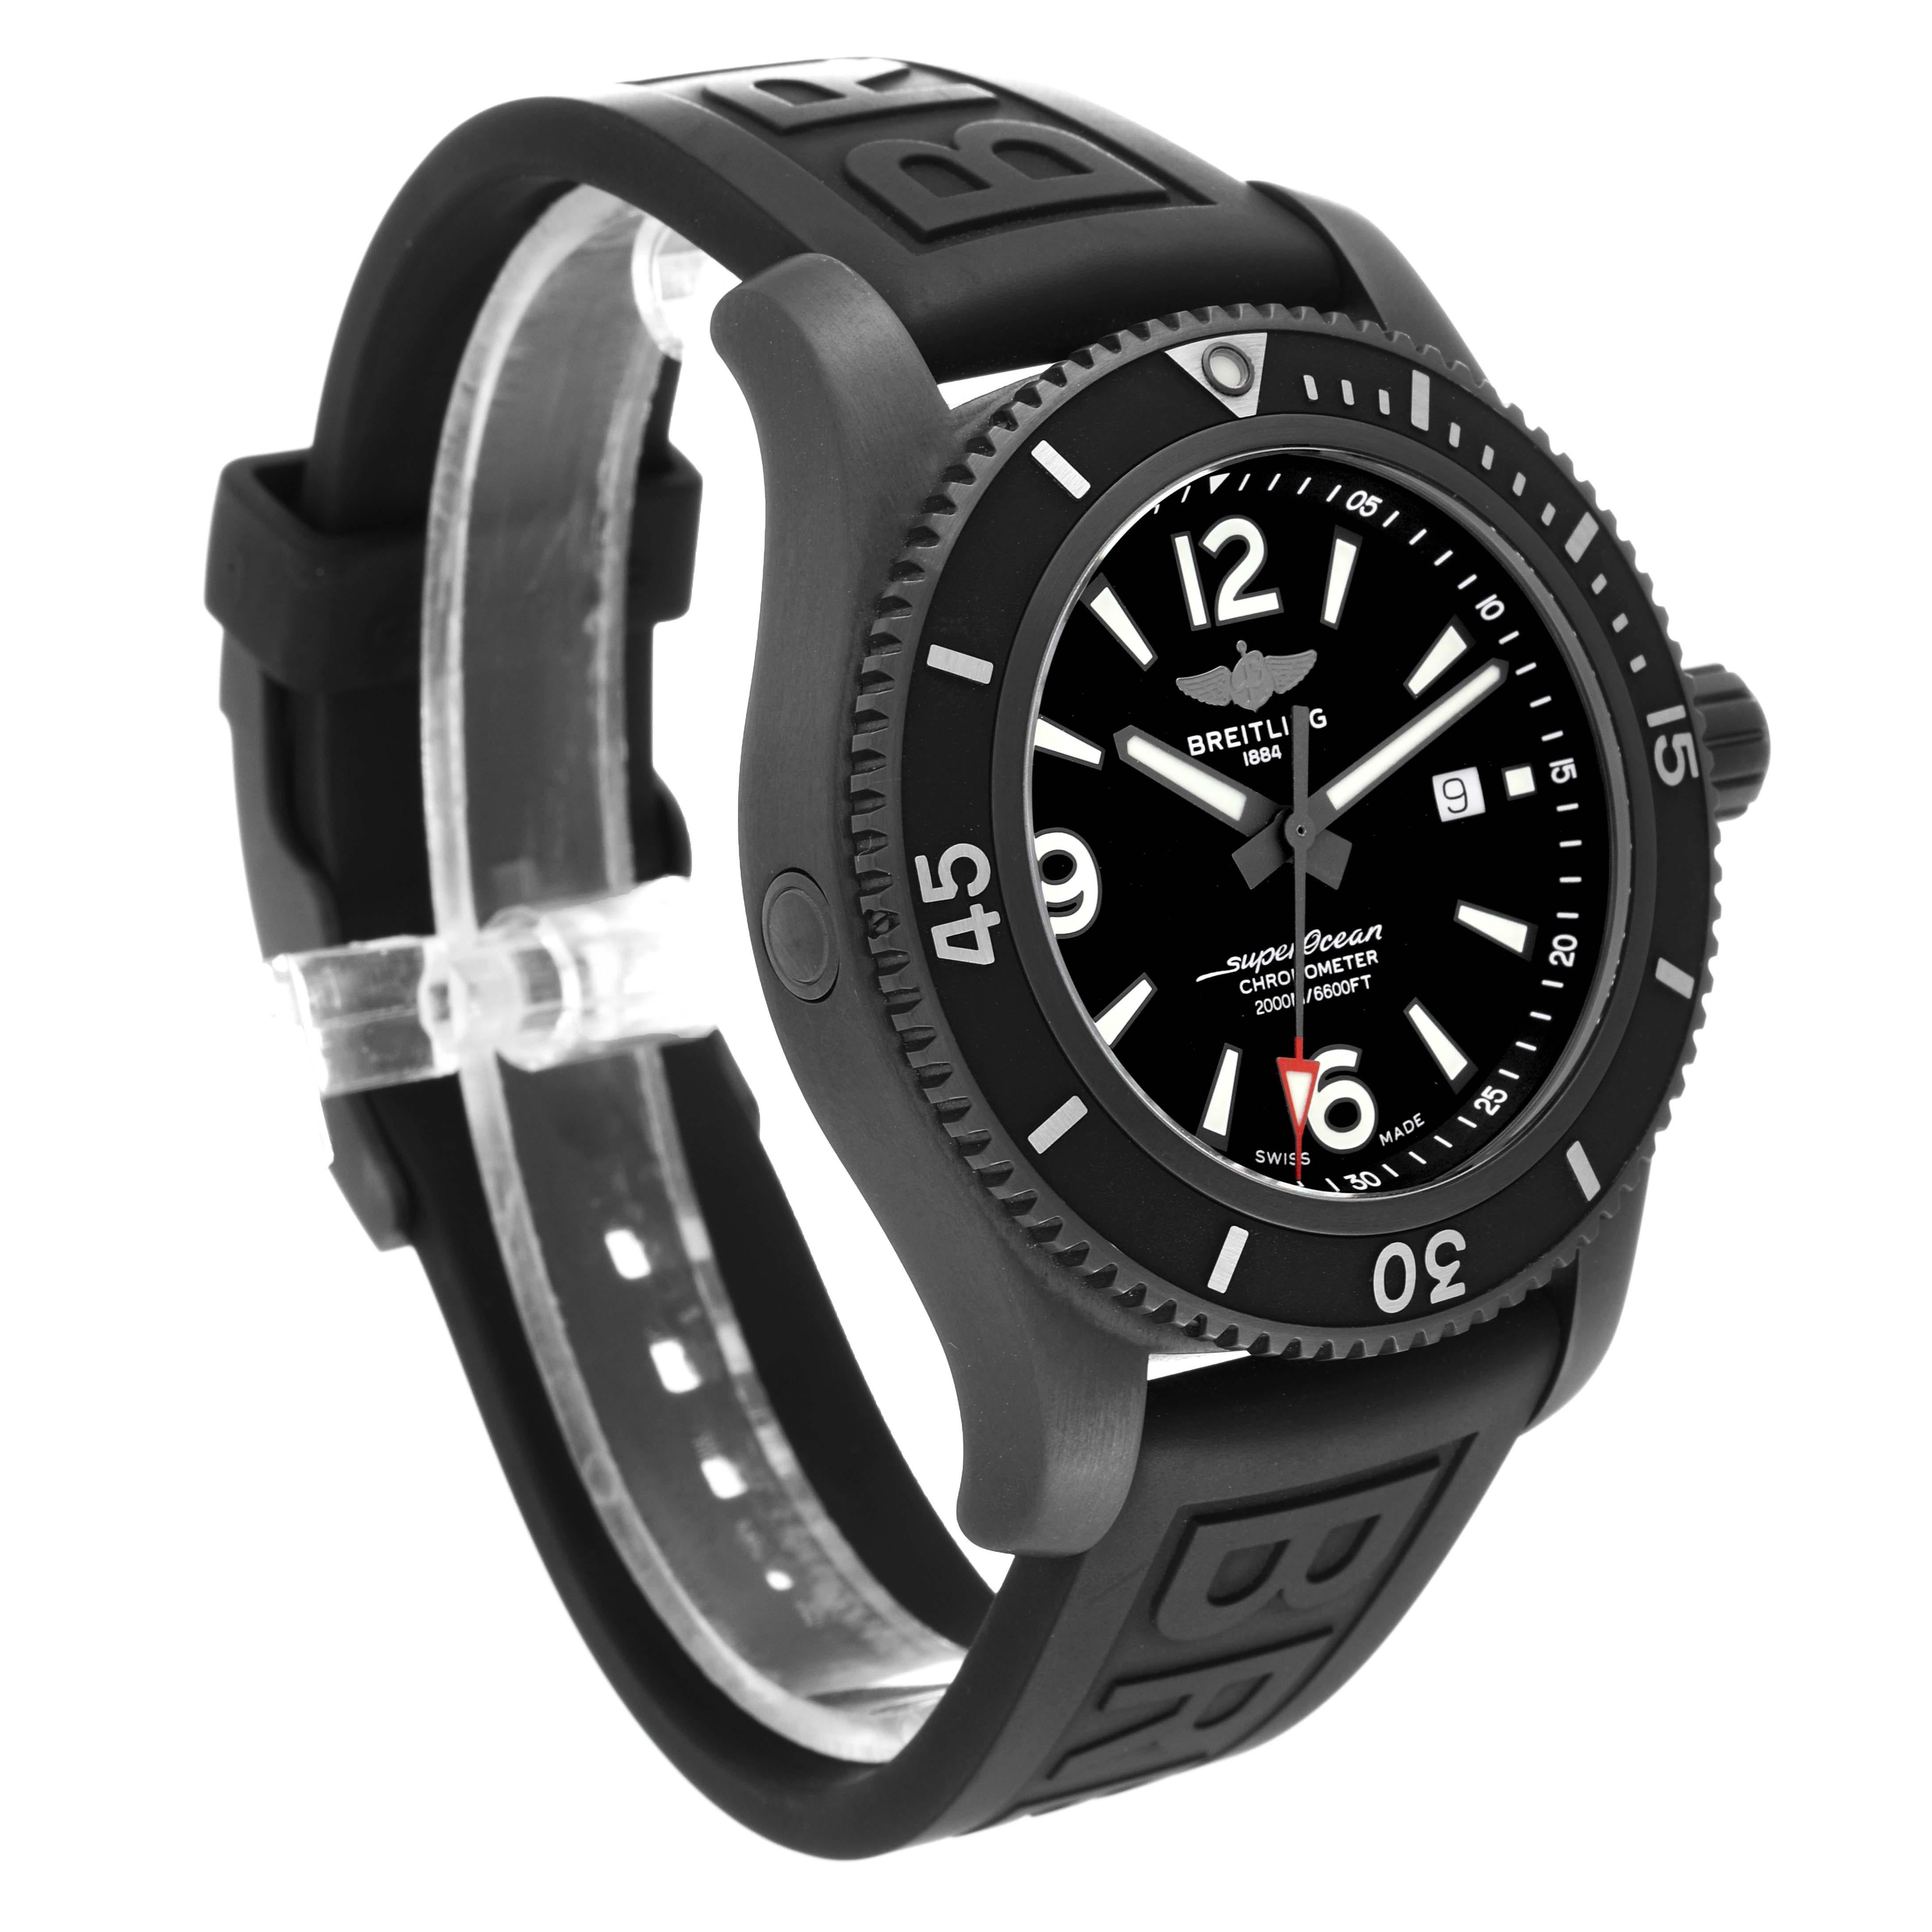 Breitling Superocean 46 Black Dial DLC Steel Mens Watch M17368 Box Card. Automatic self-winding movement. DLC coated stainless steel case 46.0 mm in diameter. Stainless steel screwed-down crown. Black stainless steel unidirectional revolving bezel.